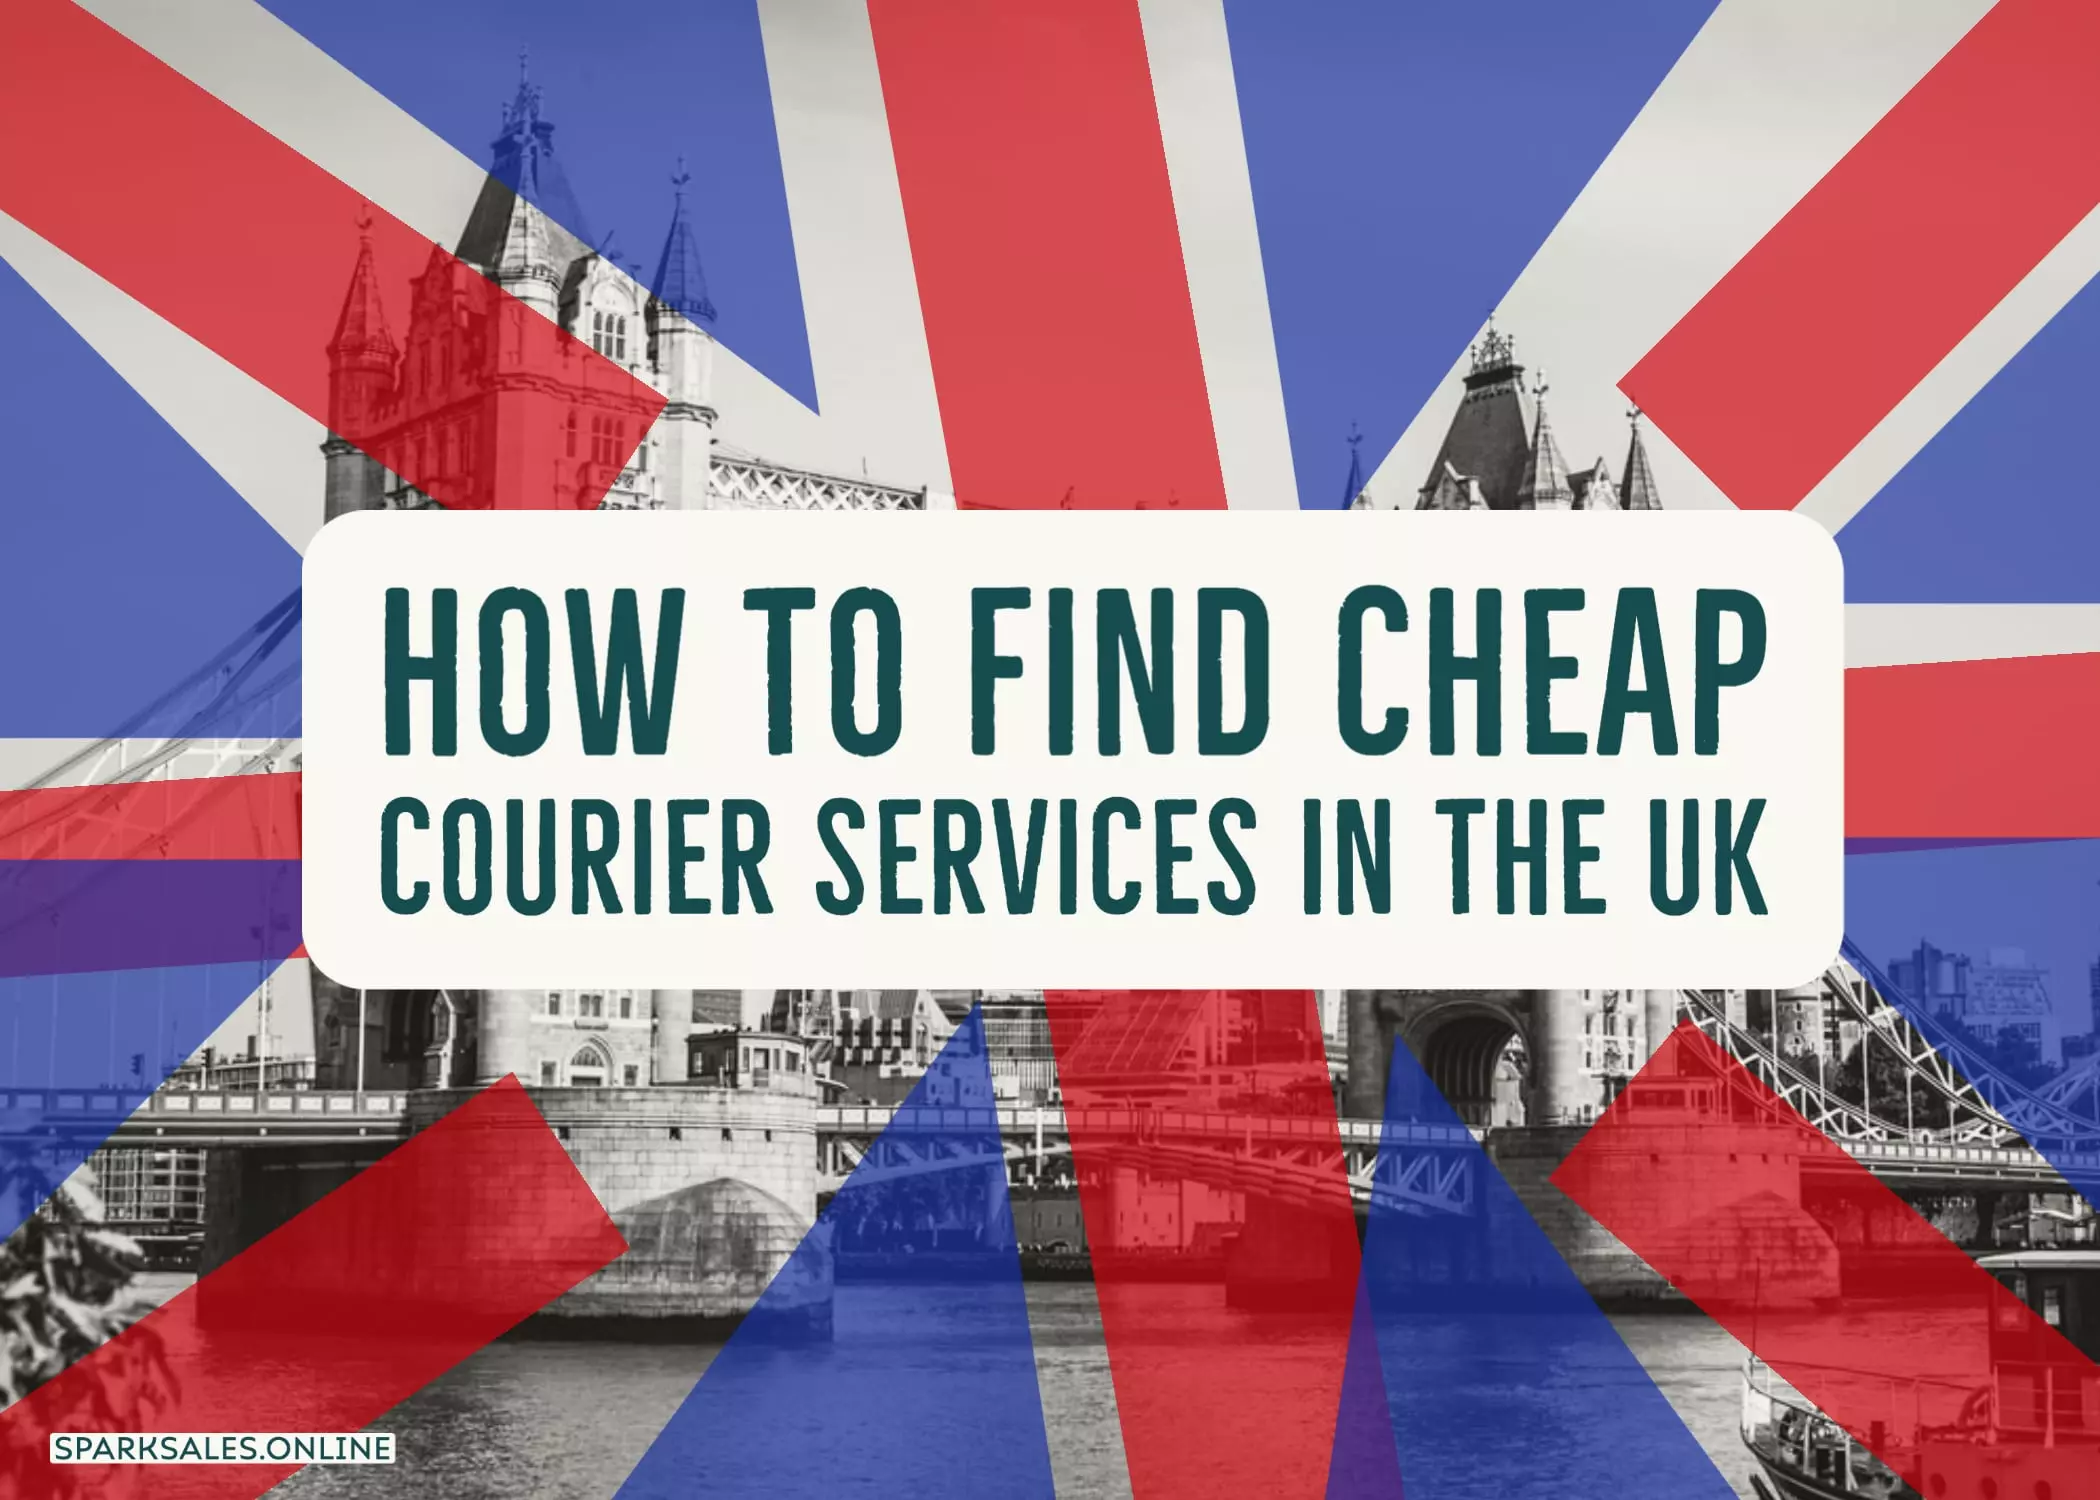 How To Find Cheap Courier Services in the UK